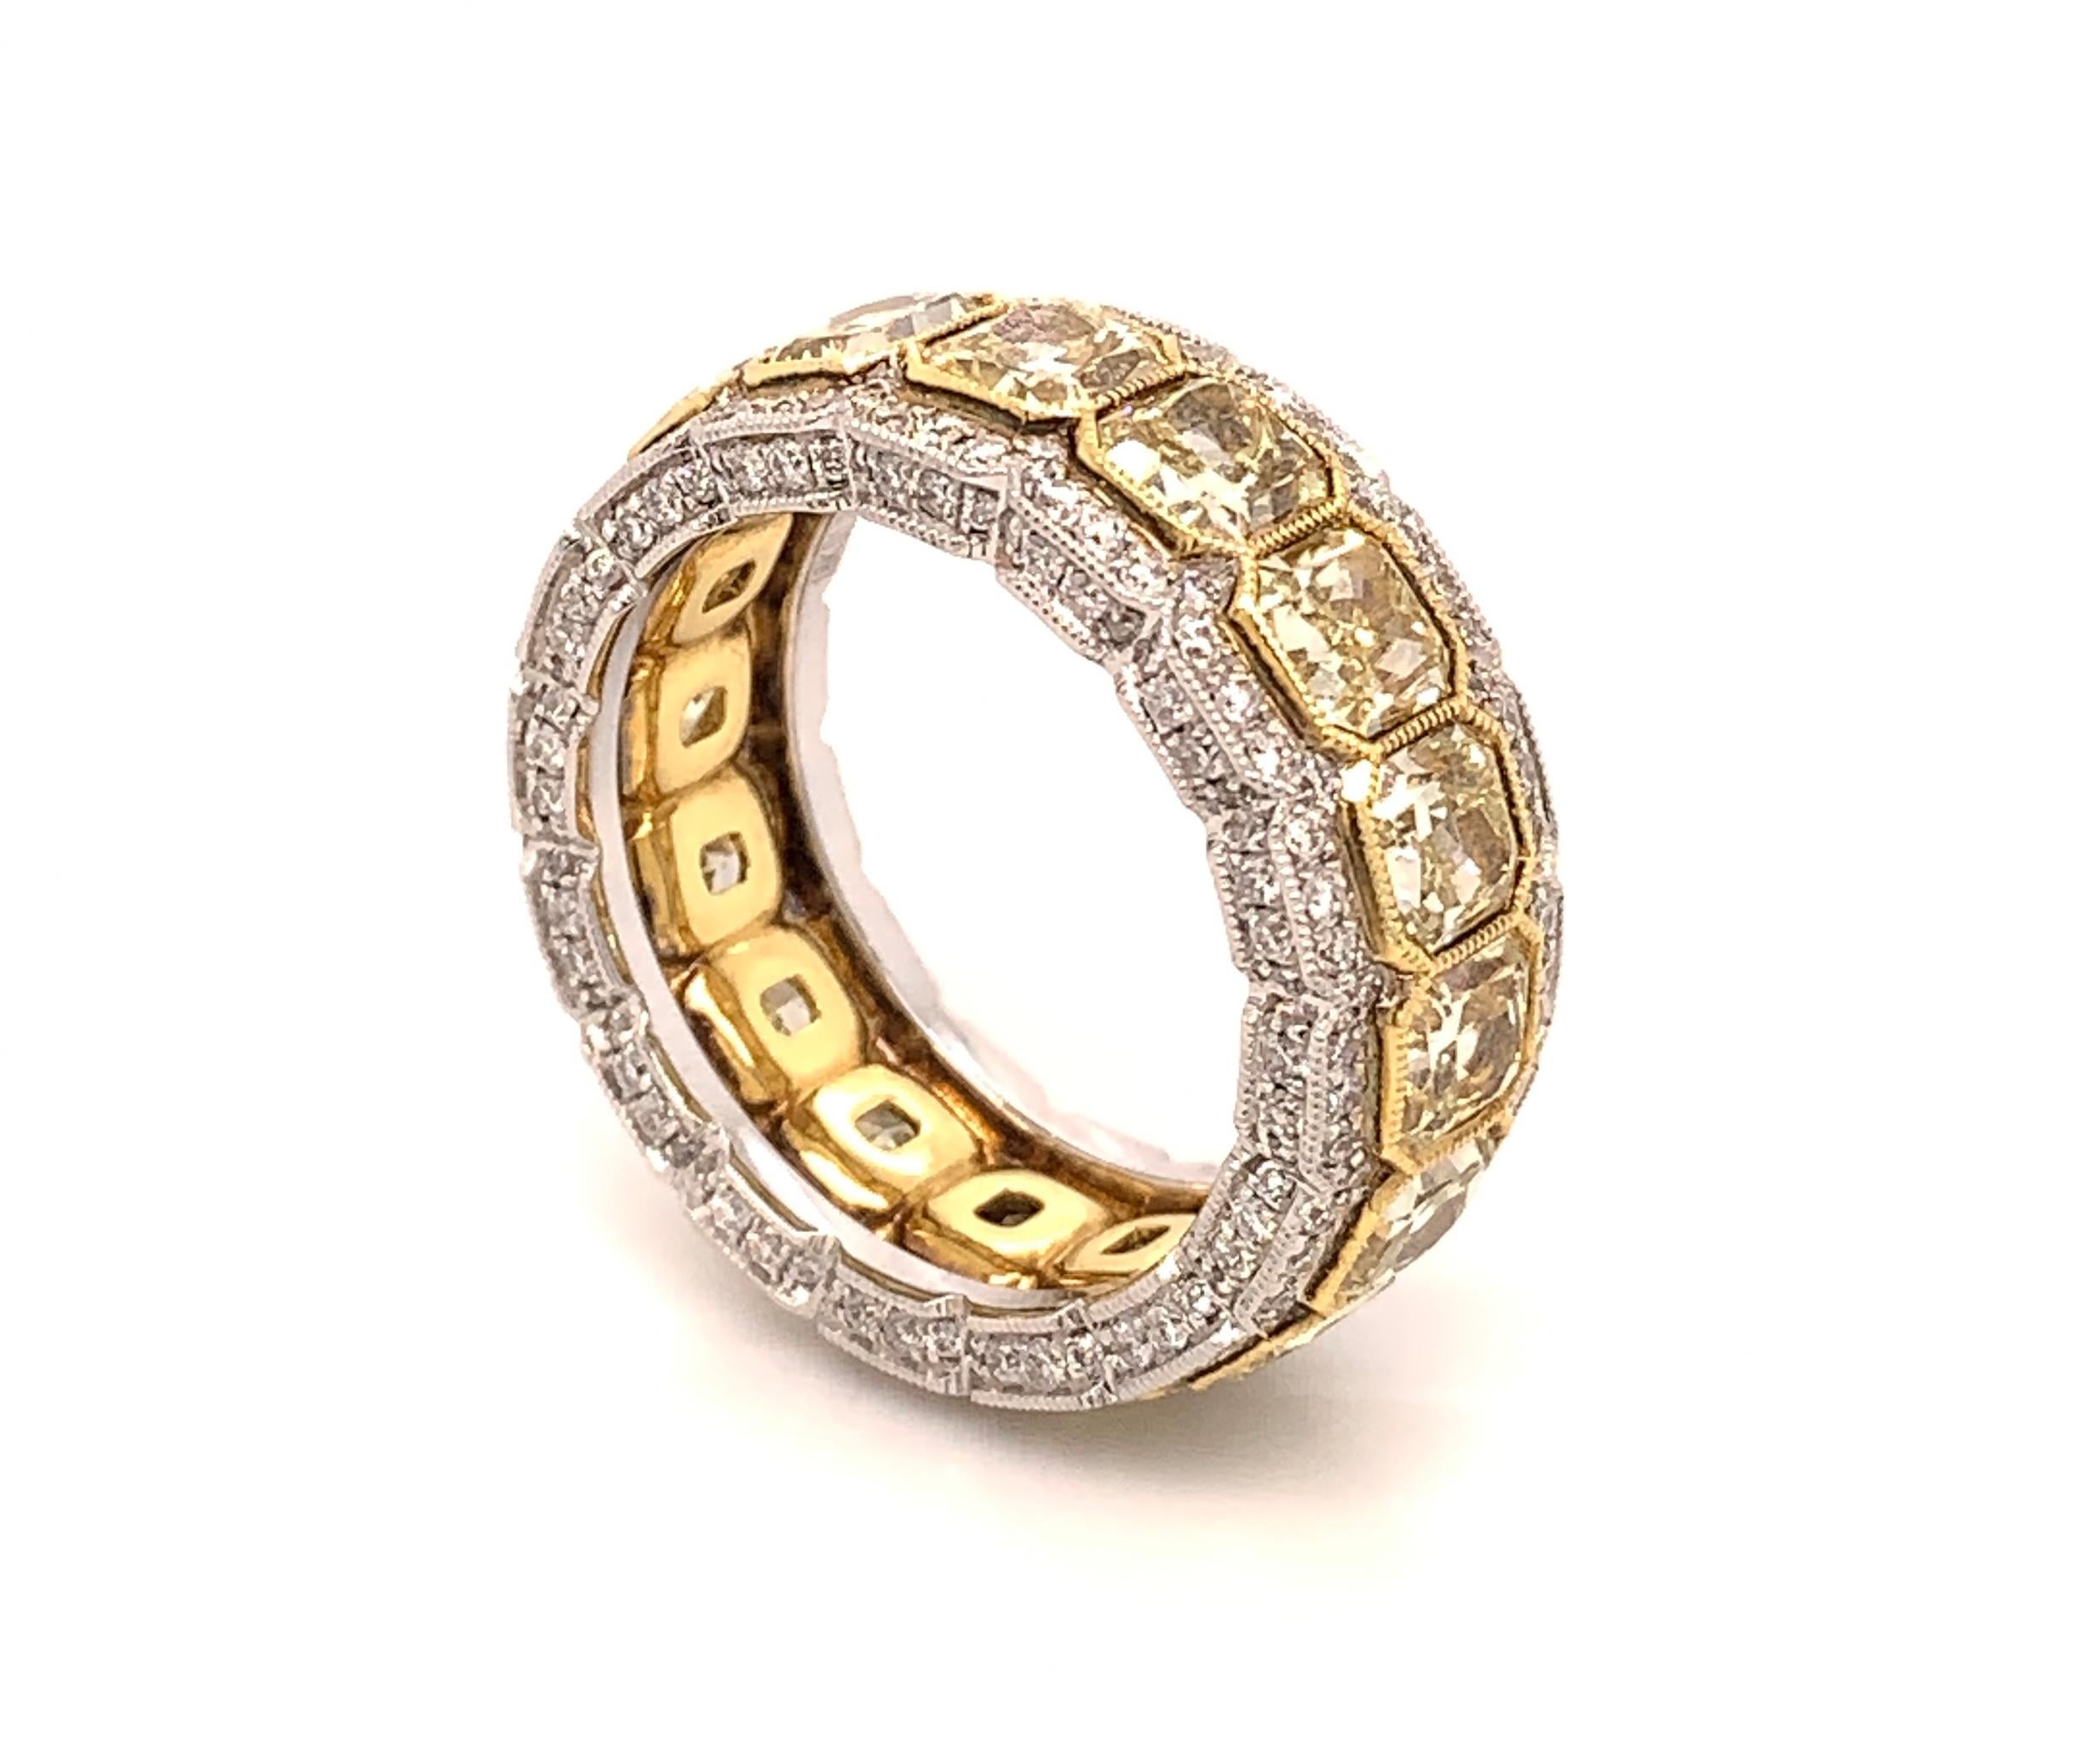 Breathtaking Radiant Cut diamond eternity ring made in rich yellow gold amazing and brilliant from all angles. Will take your breath away the moment you put it on. Perfectly matched circle of fancy yellow radiant cut diamonds, an ideal wedding or